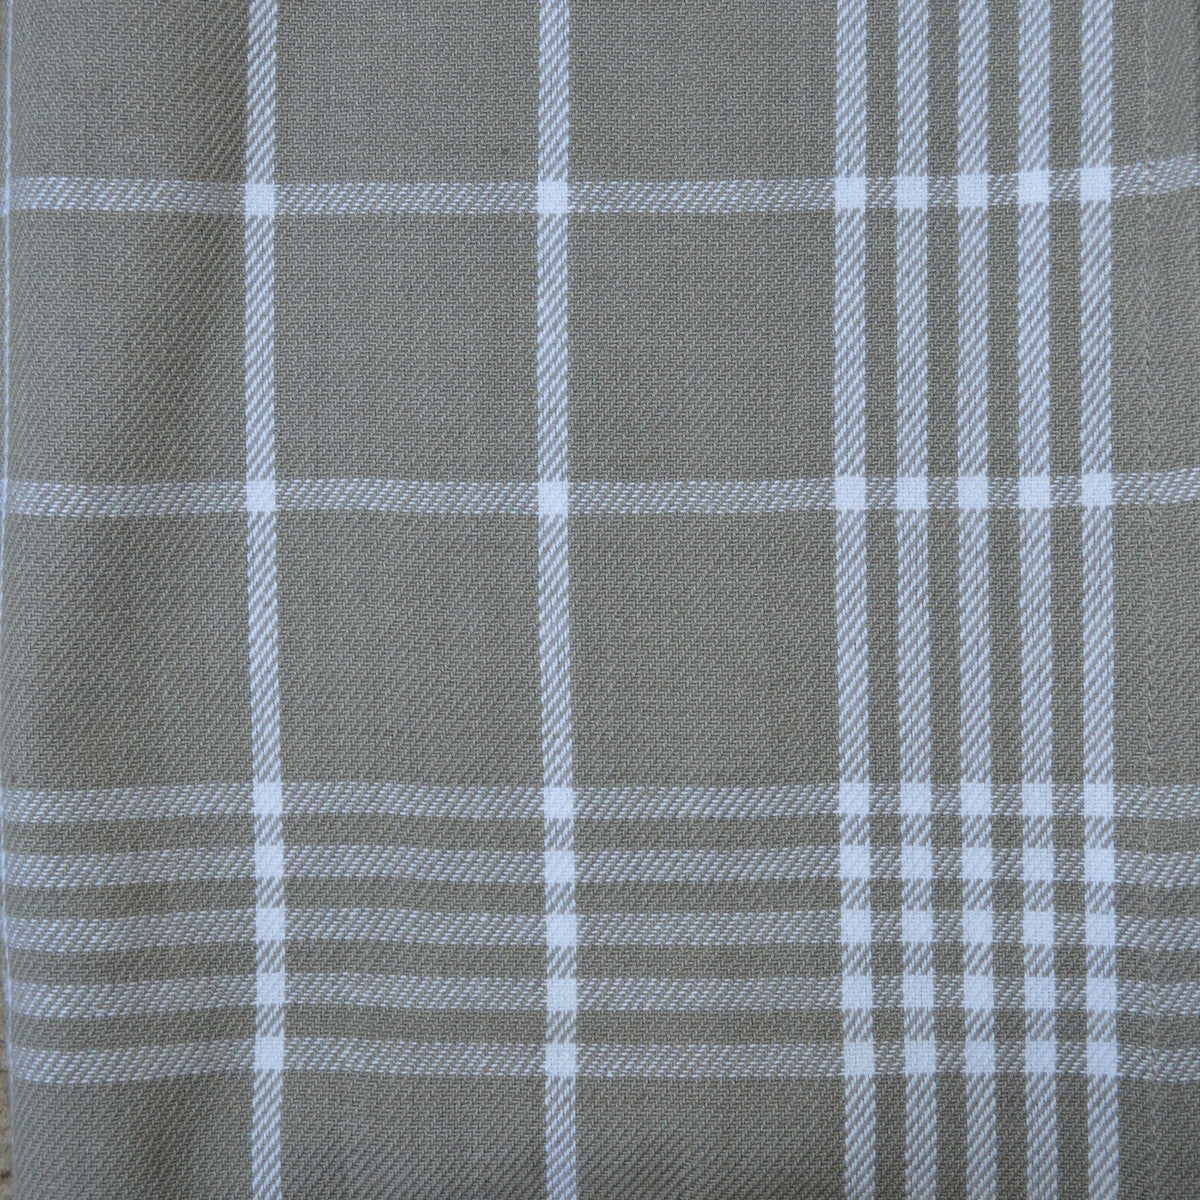 Tea Towel - Dunroven House Home Collection Picnic Plaid Taupe and White